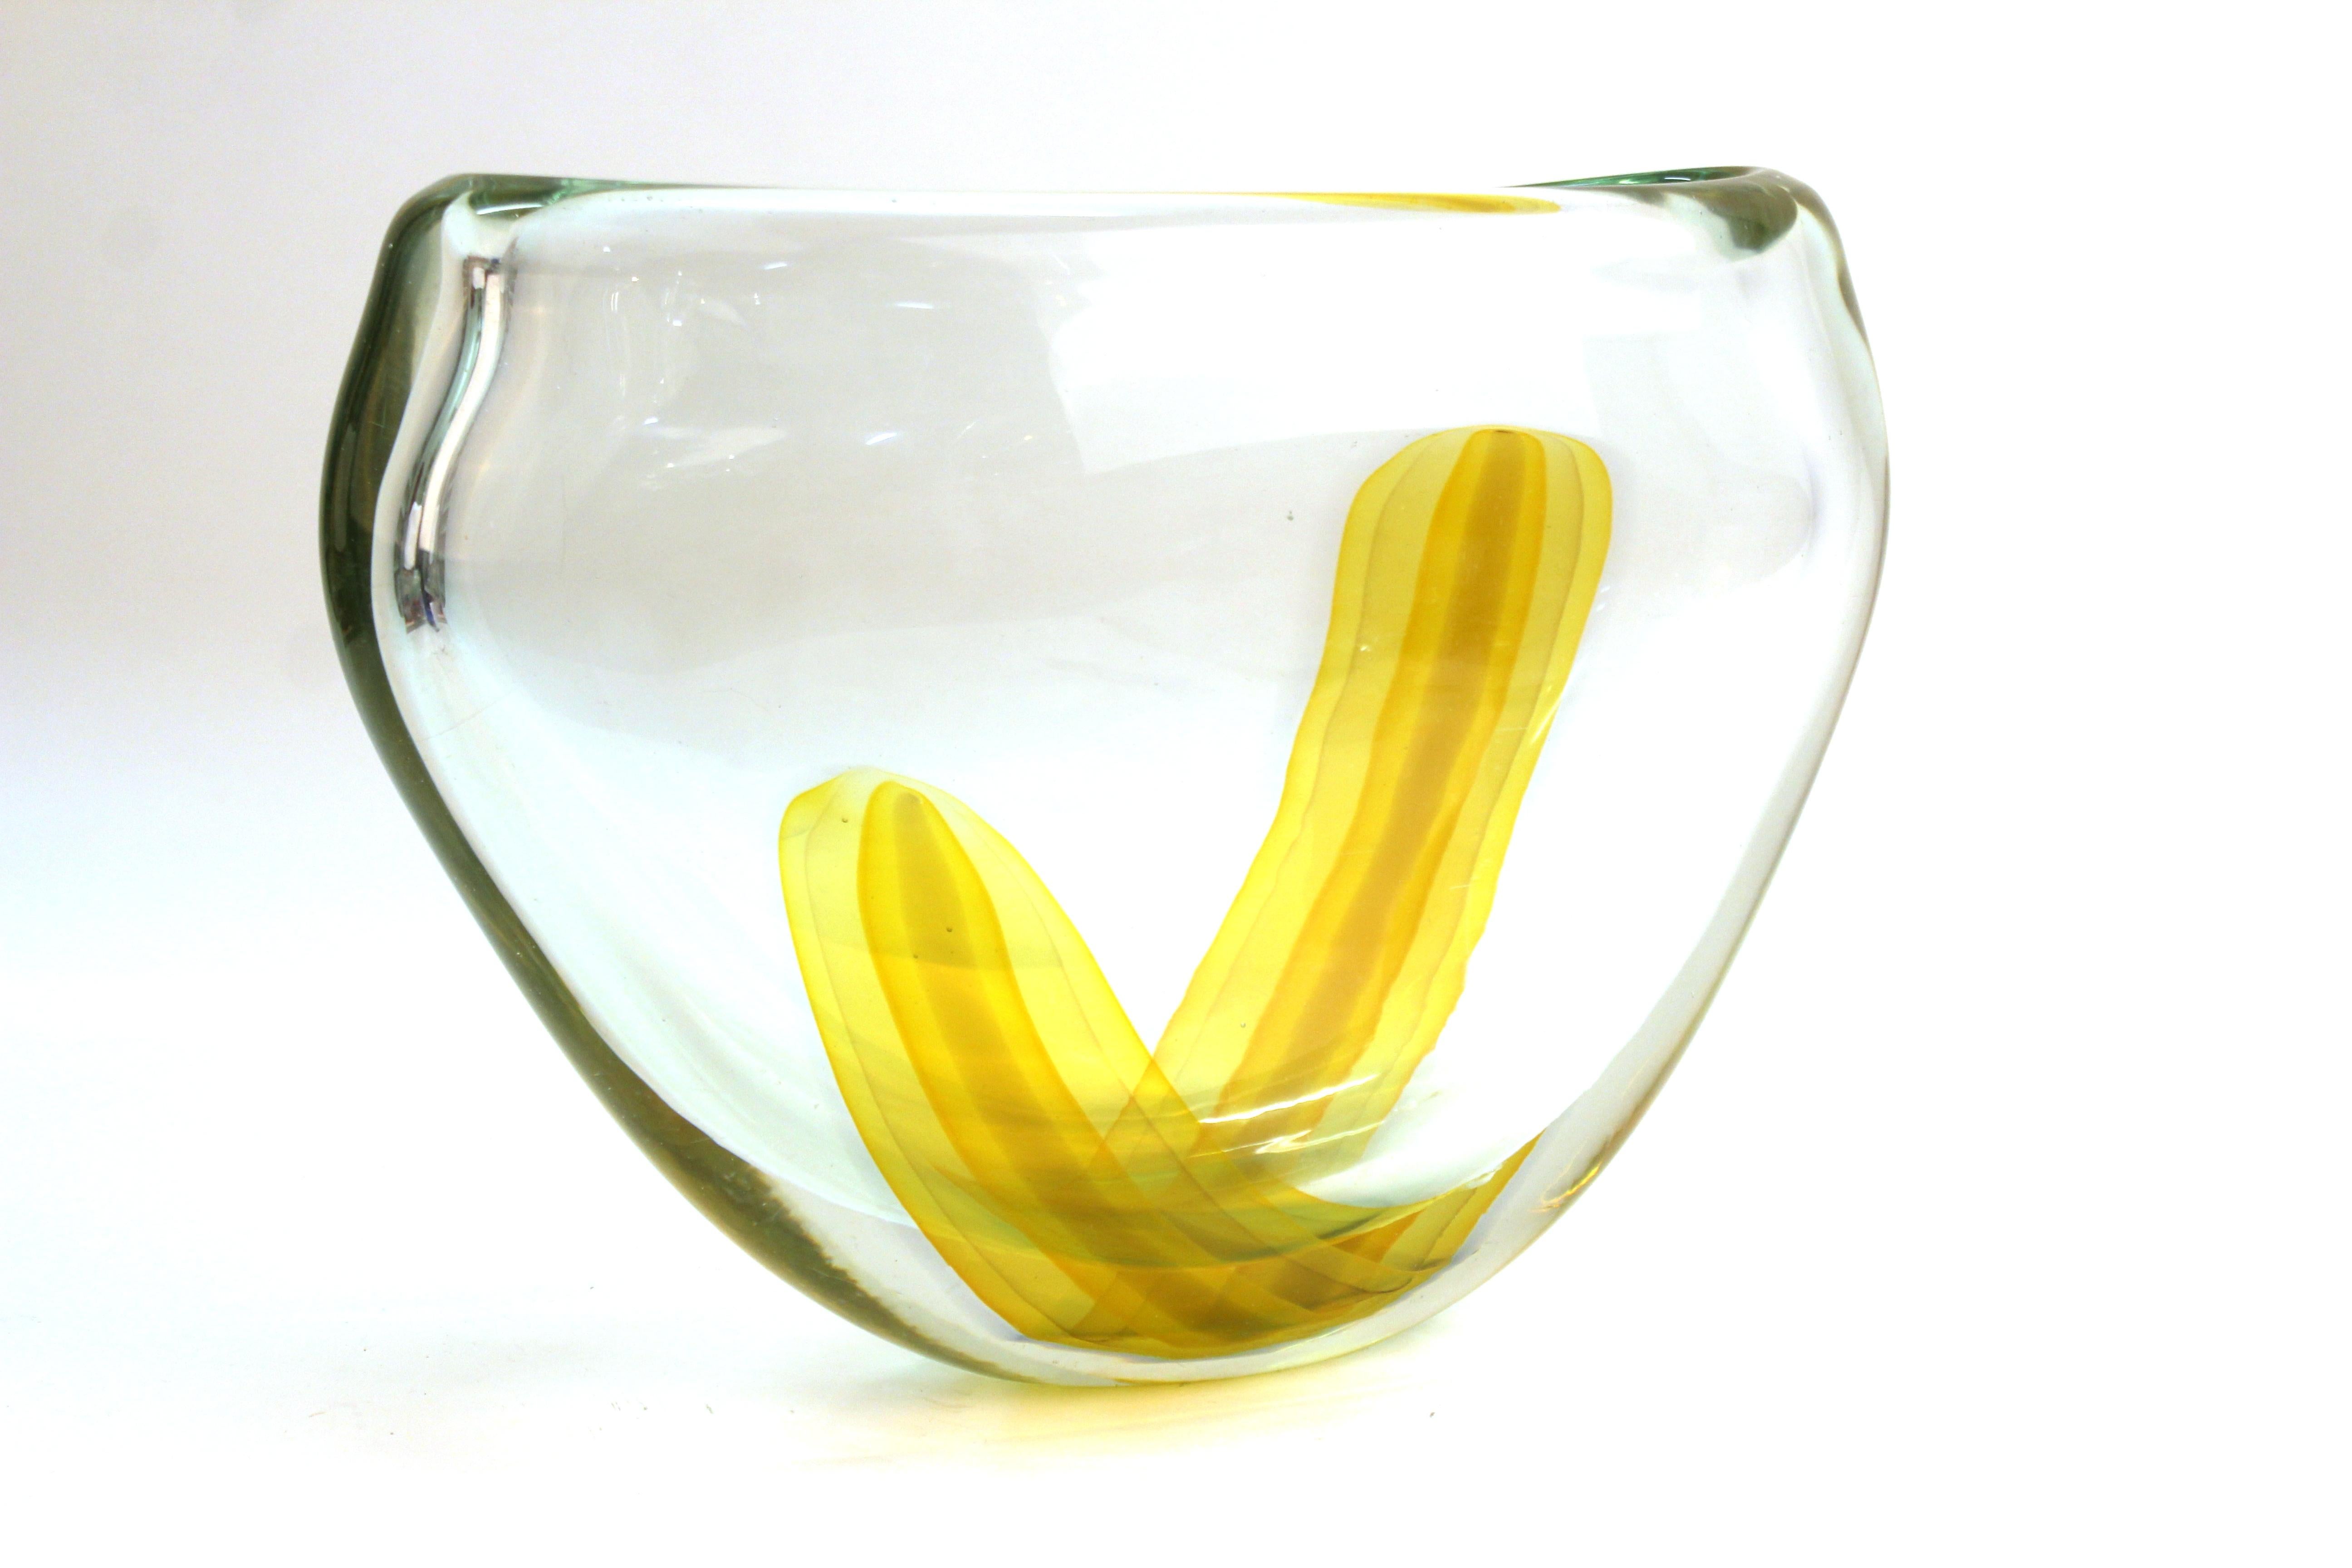 Italian modern art glass vase made in Murano in the late 20th century. The piece has a strip of yellow glass encased in a thick clear glass. In great vintage condition with age-appropriate wear.